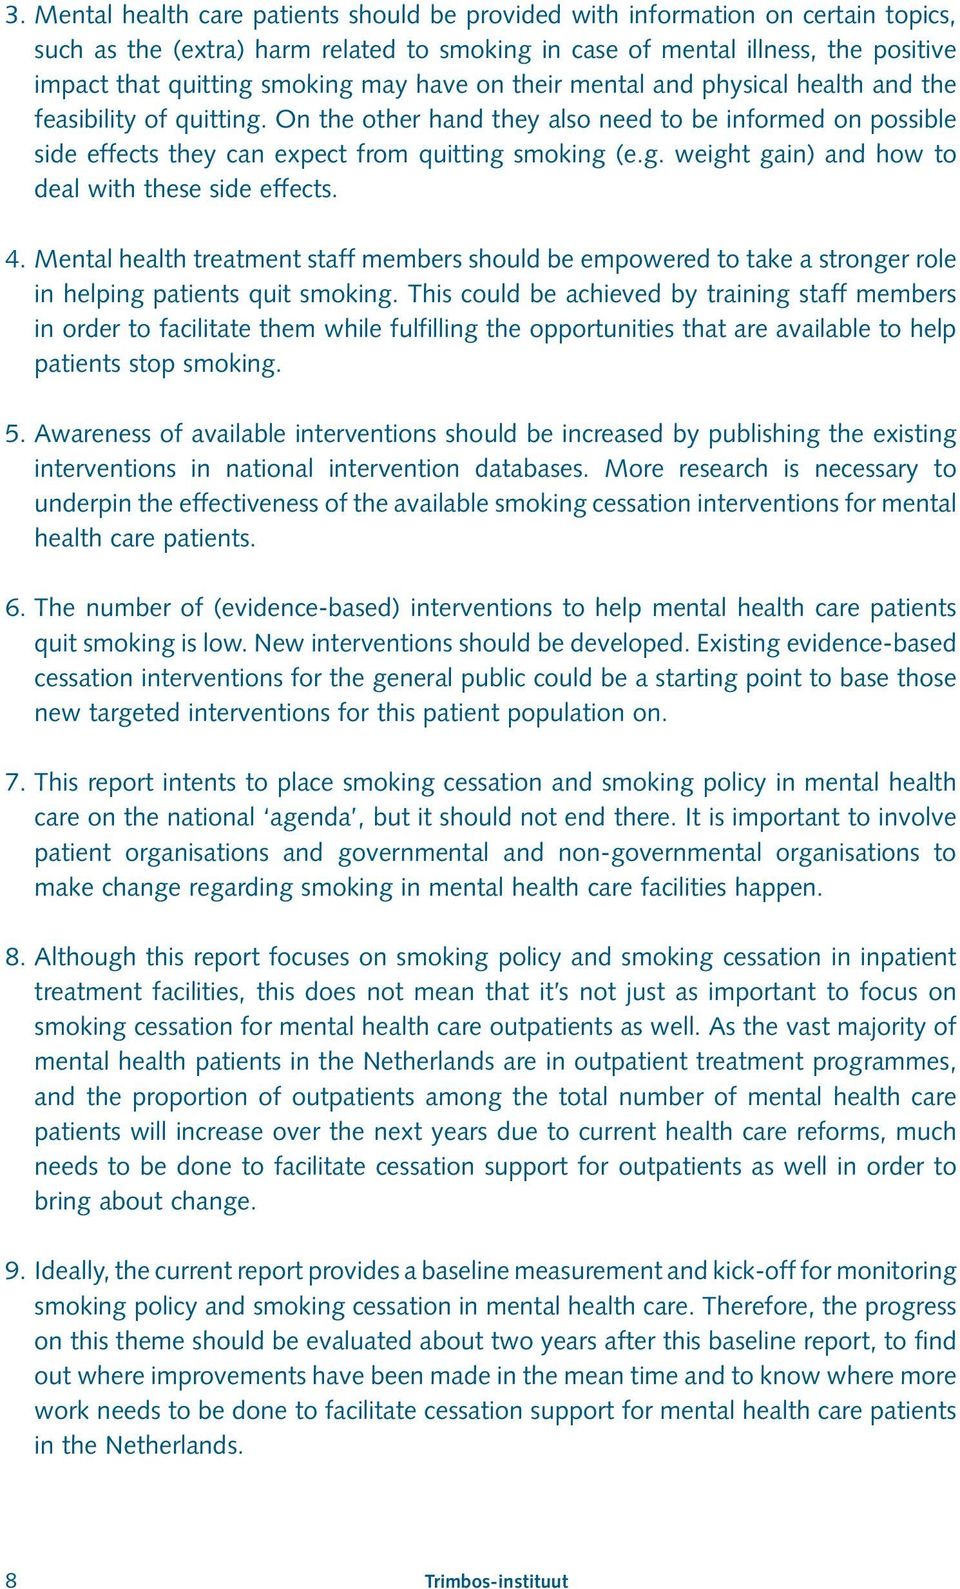 4. Mental health treatment staff members should be empowered to take a stronger role in helping patients quit smoking.